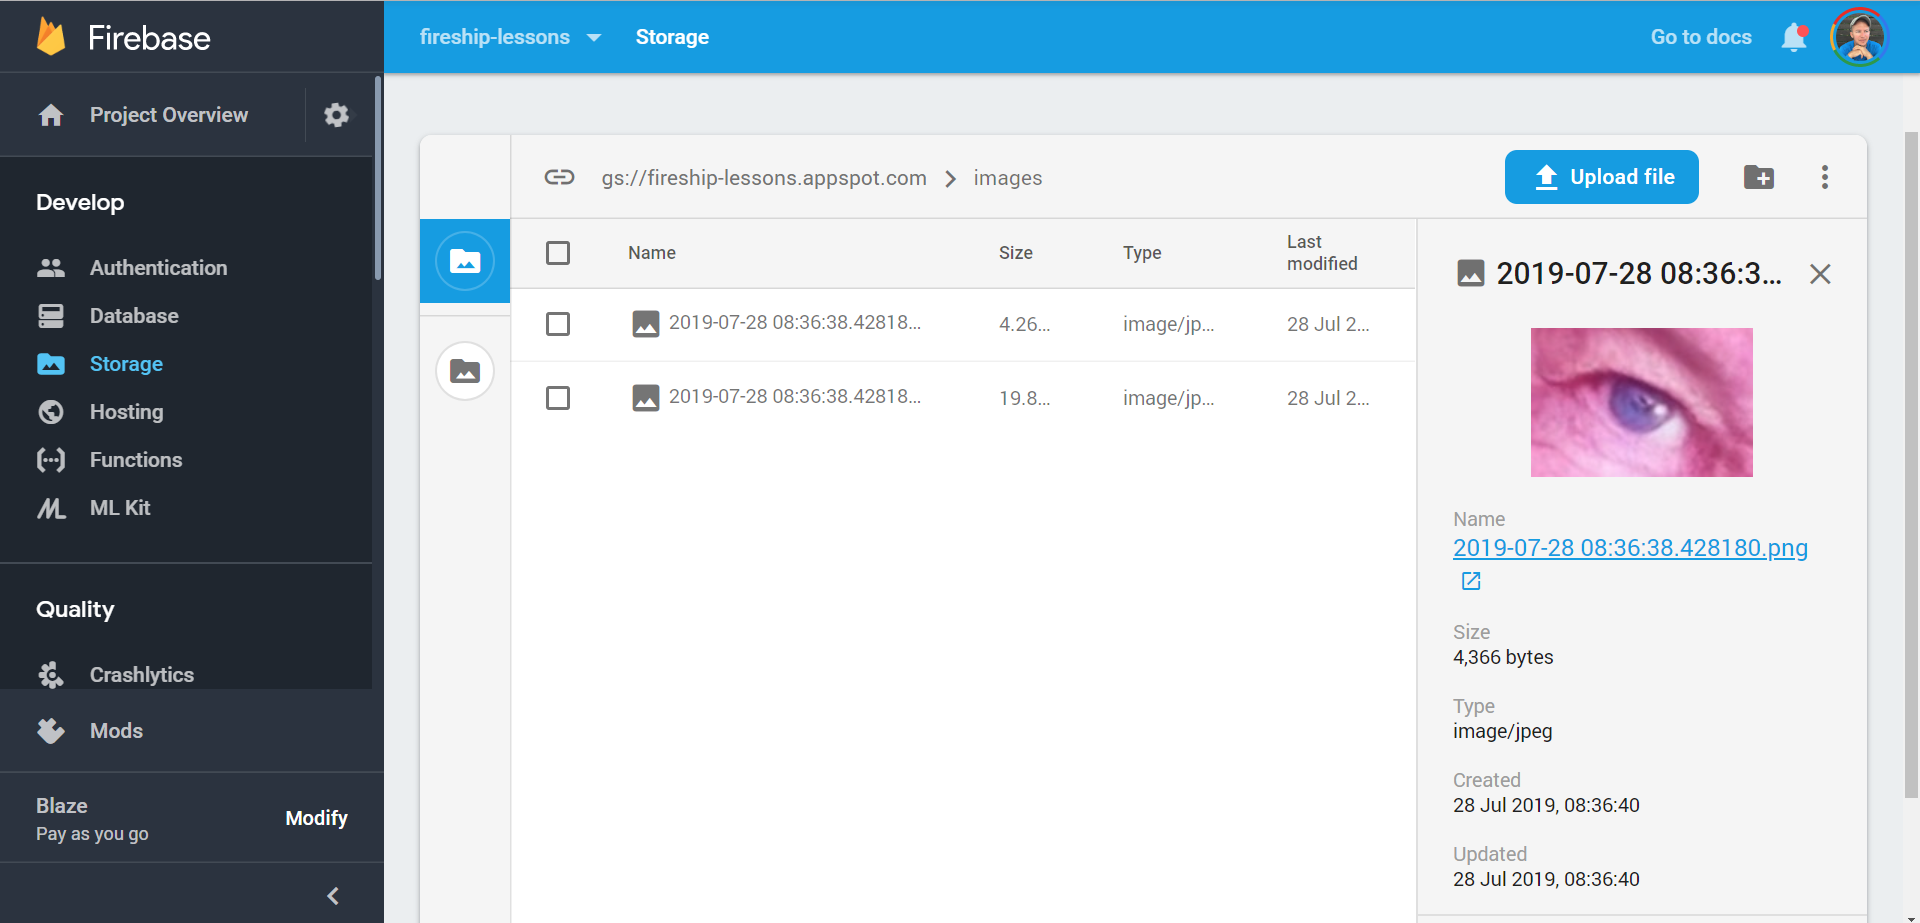 You should be able to view the end result in Firebase Cloud Storage when the upload is complete